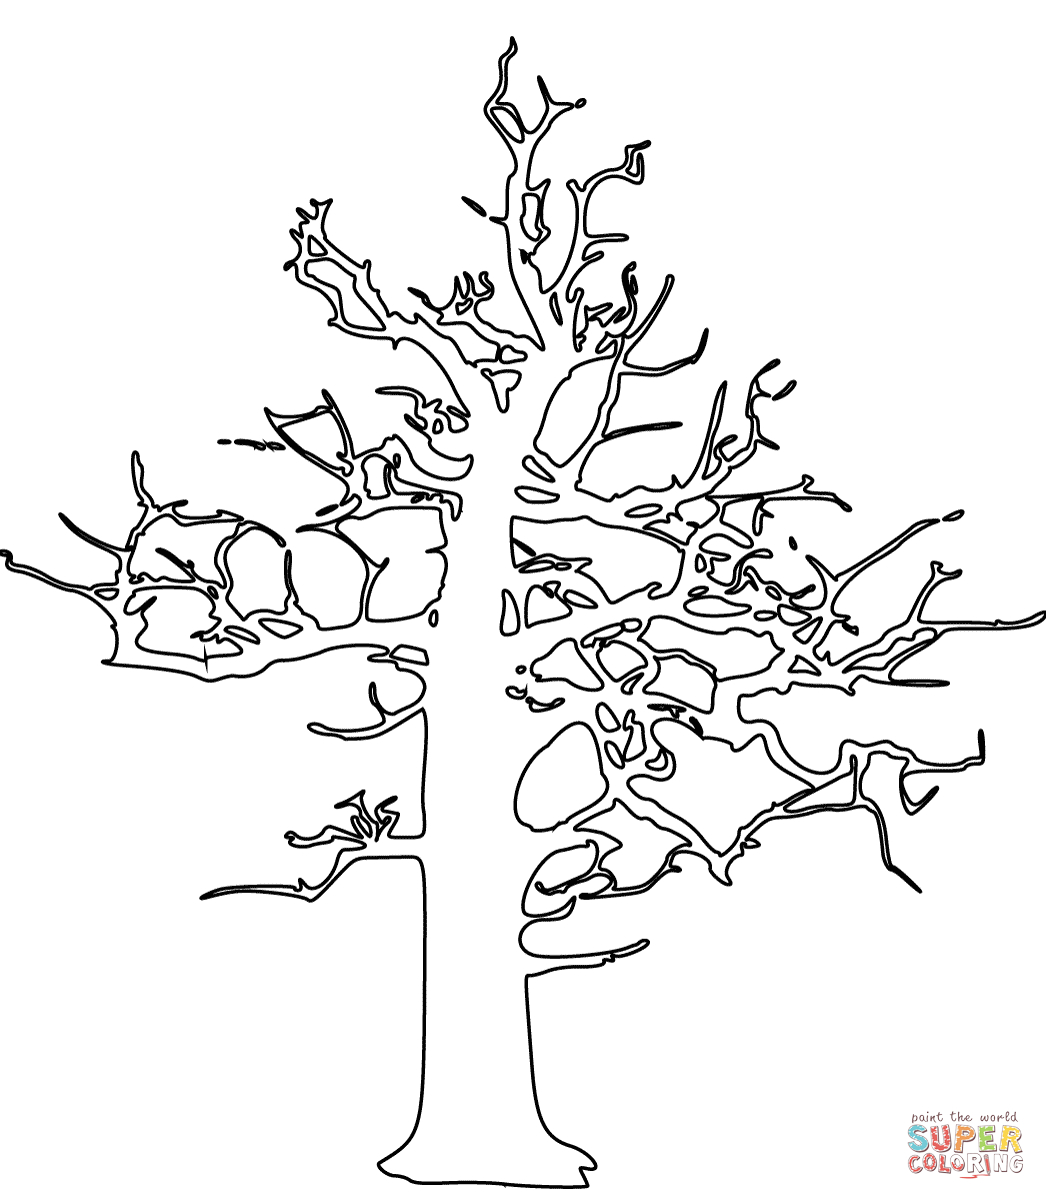 Dead Tree Coloring Page | Free Printable Coloring Pages - Tree Coloring Pages Free Printable